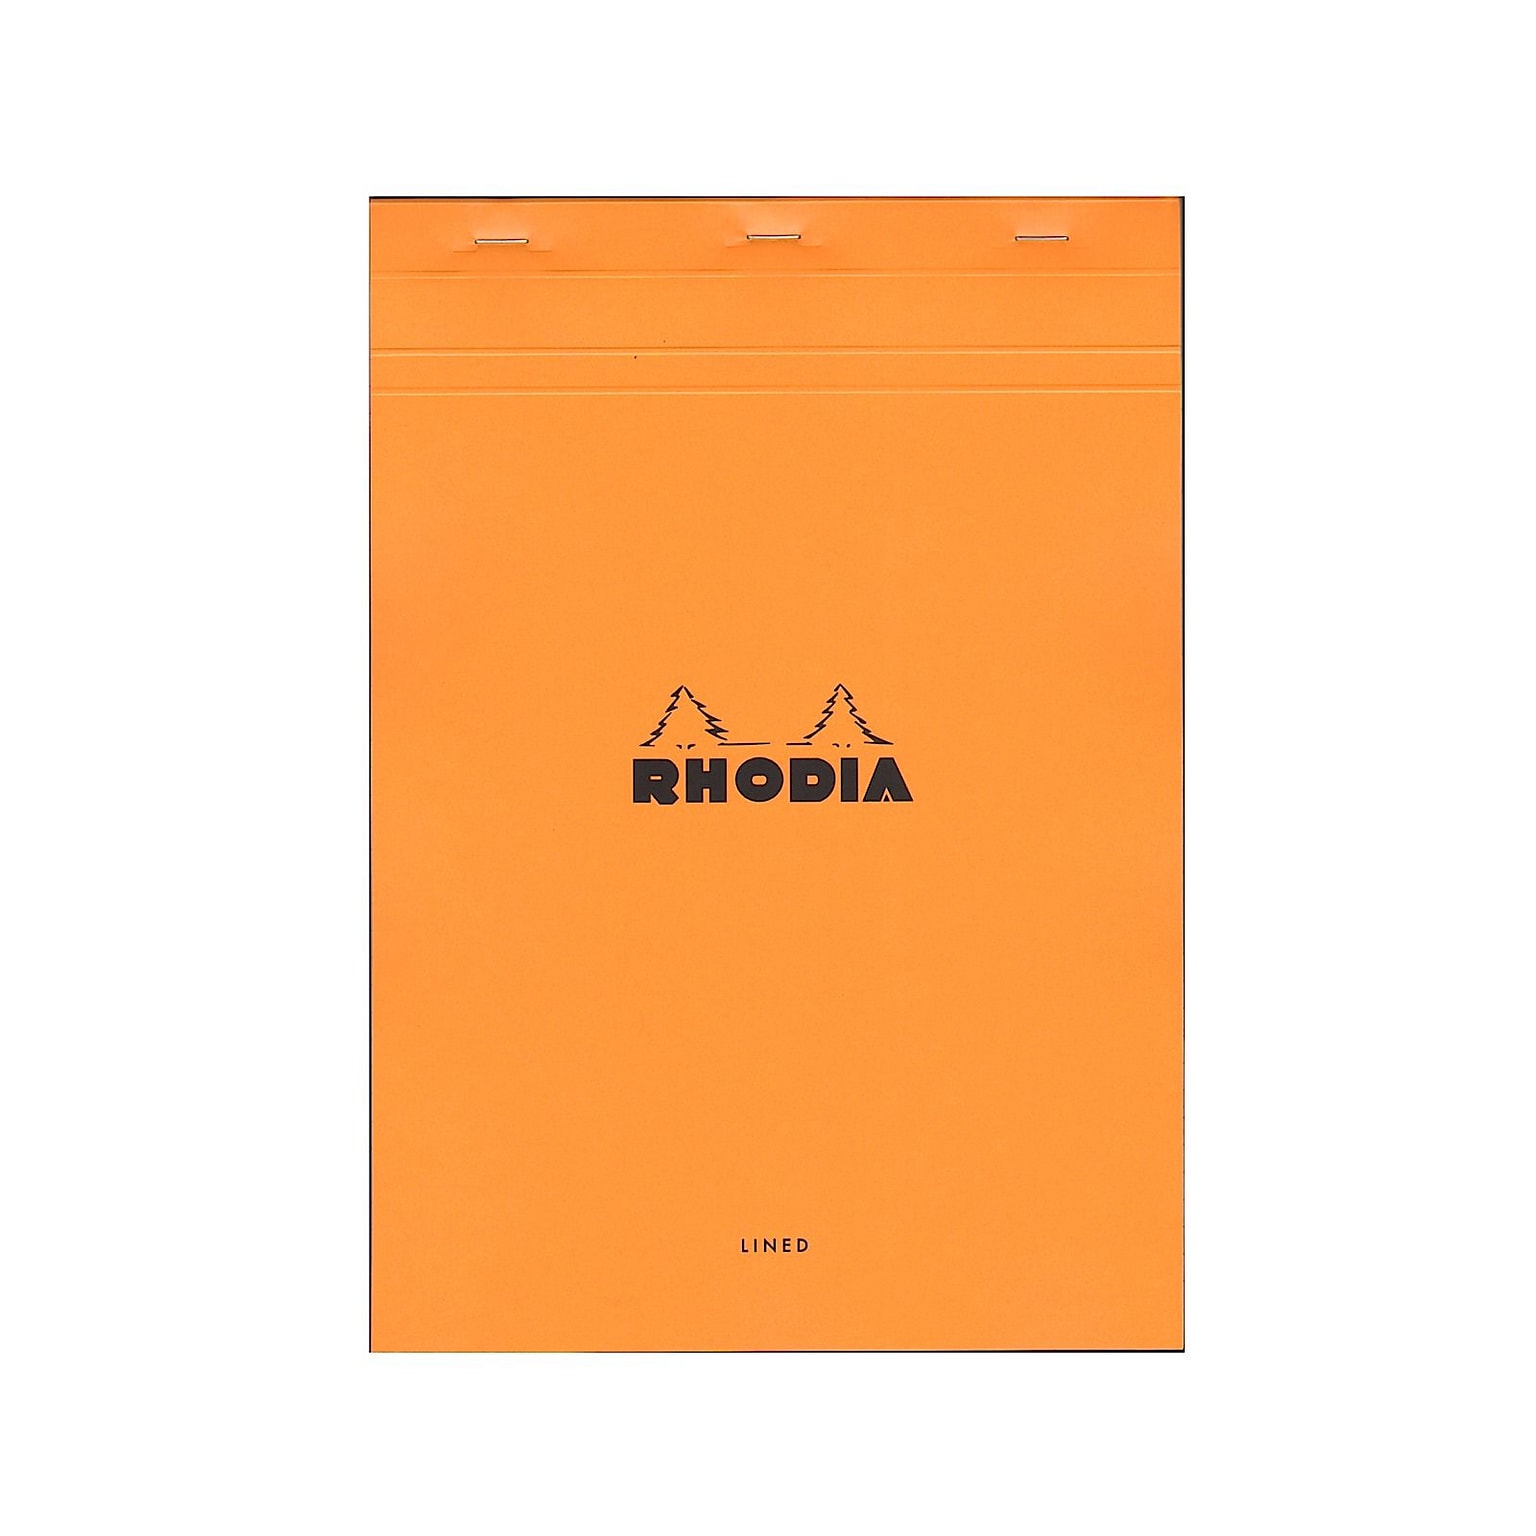 Rhodia Classic French Paper Pads Ruled With Margin 8 1/4 In. X 11 3/4 In. Orange [Pack Of 3] (3PK-18600)